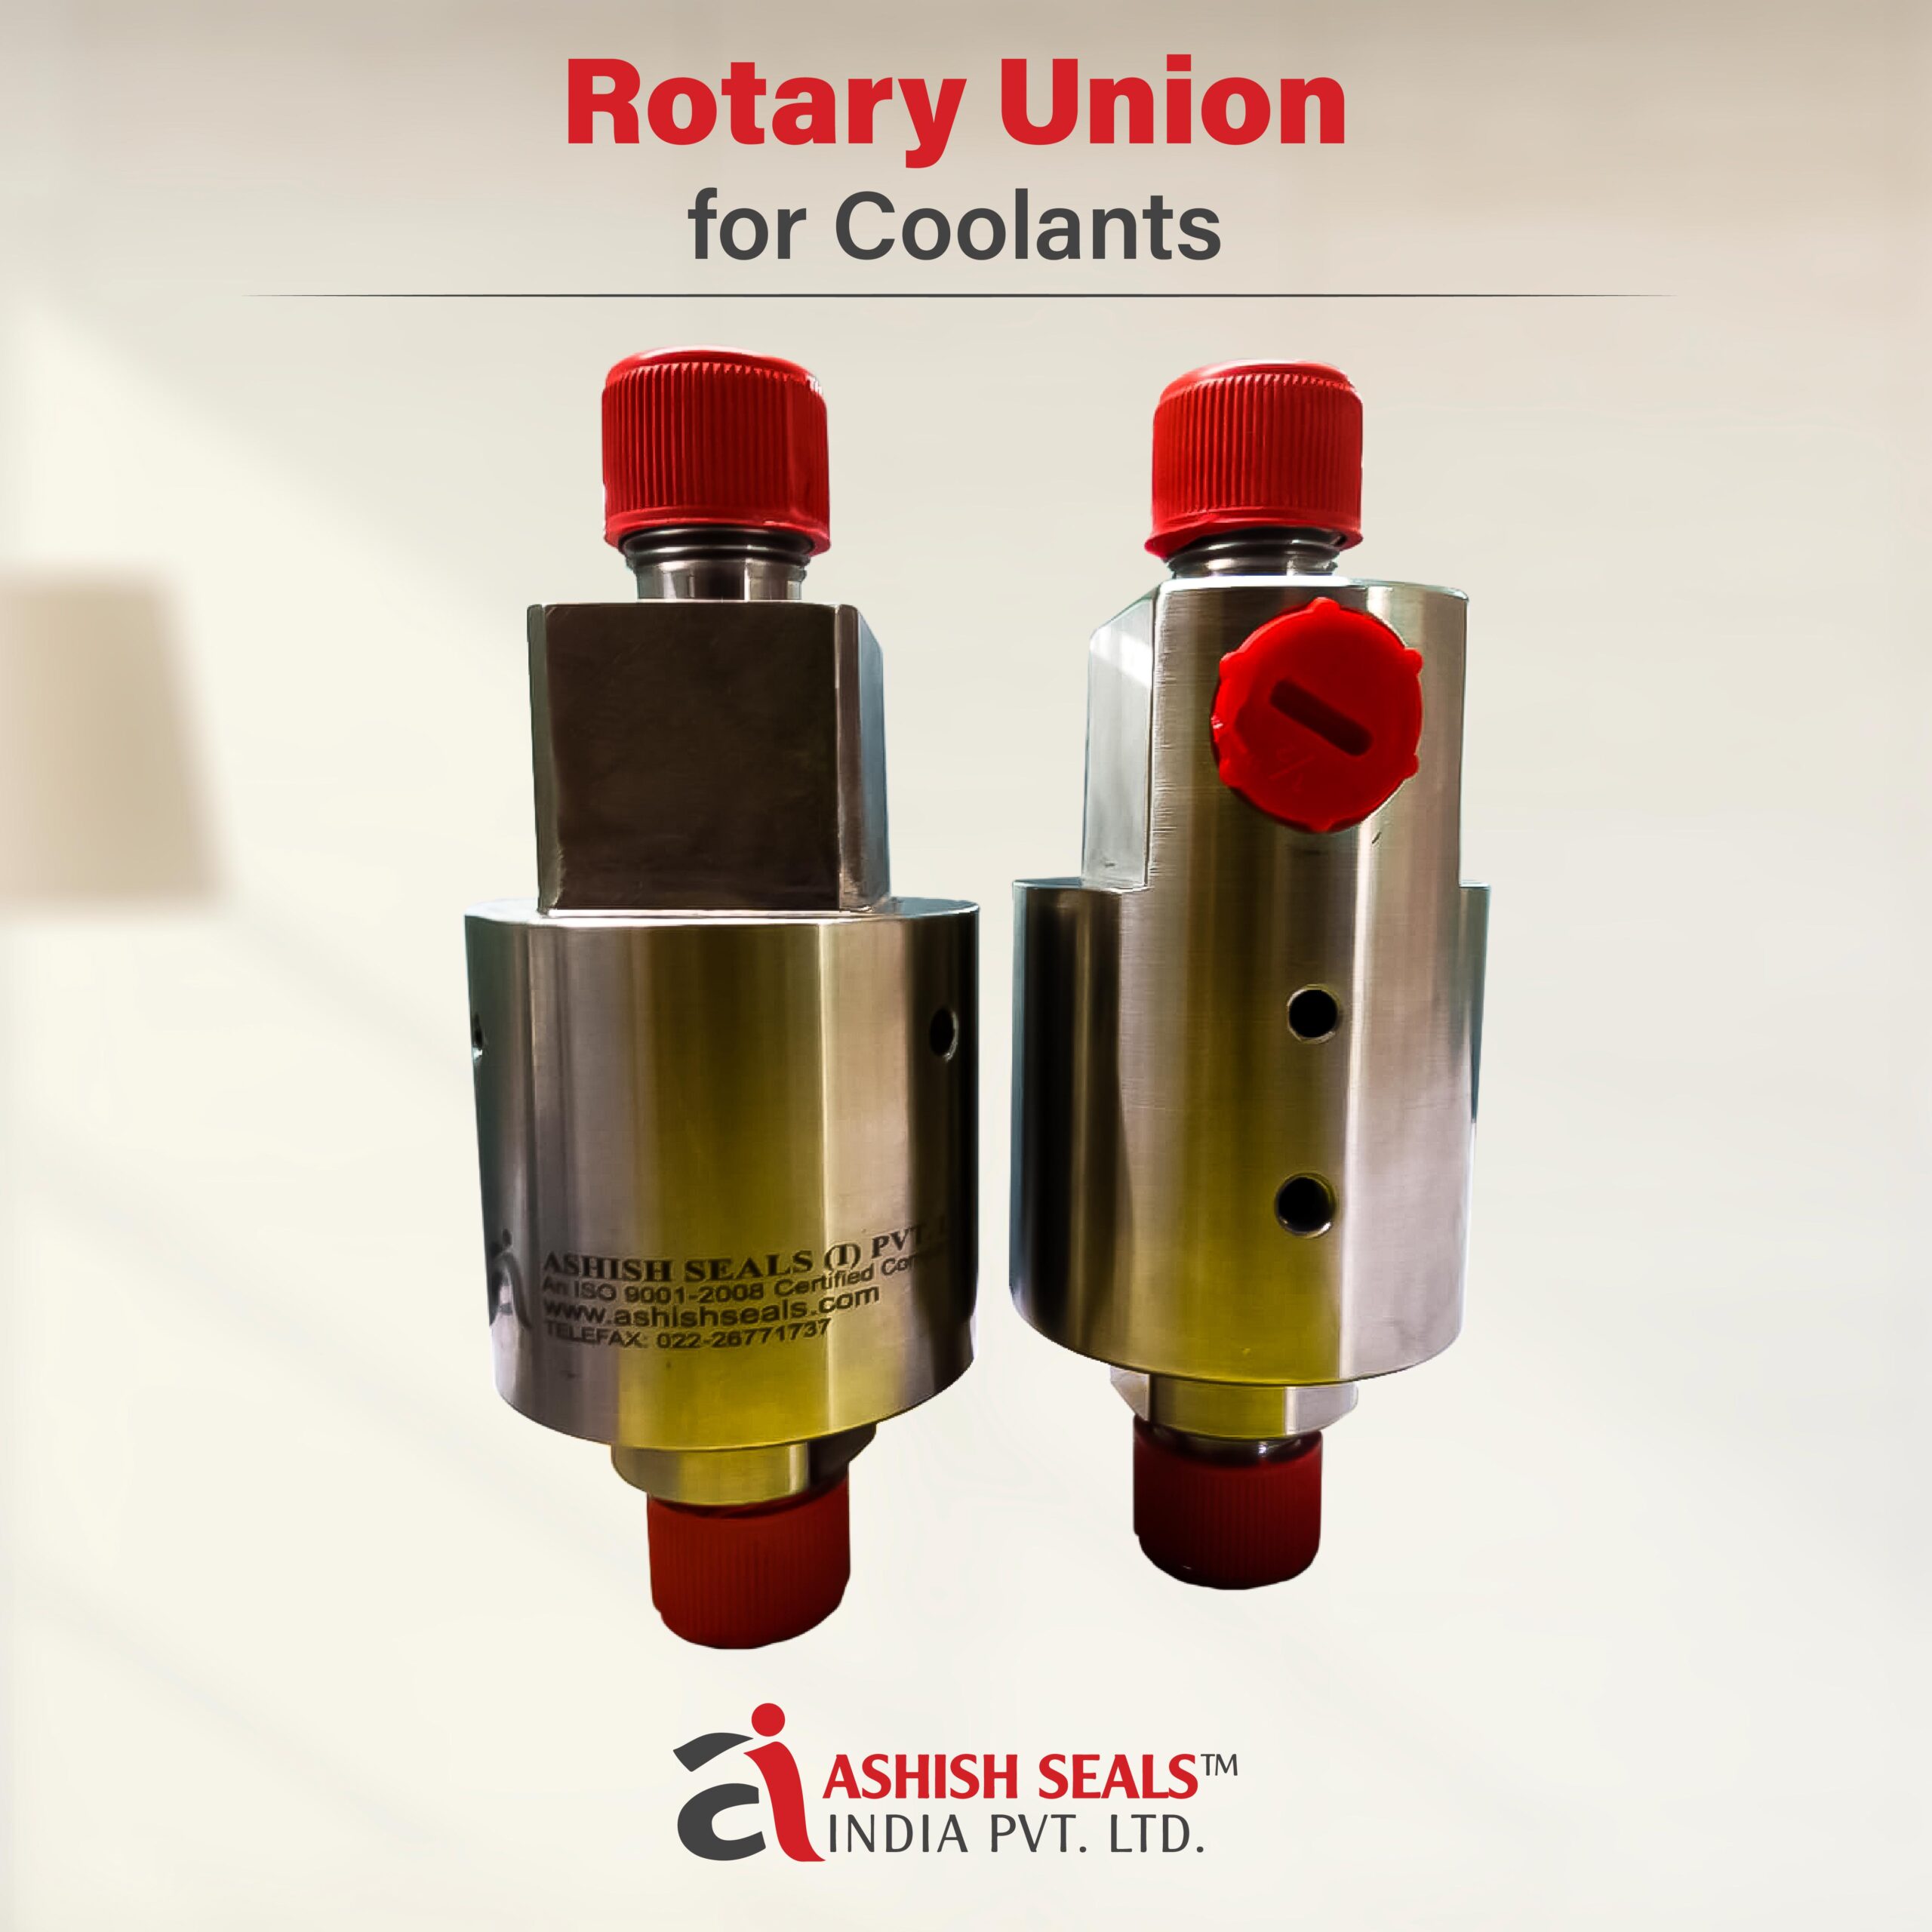 Rotary Unions for Coolants